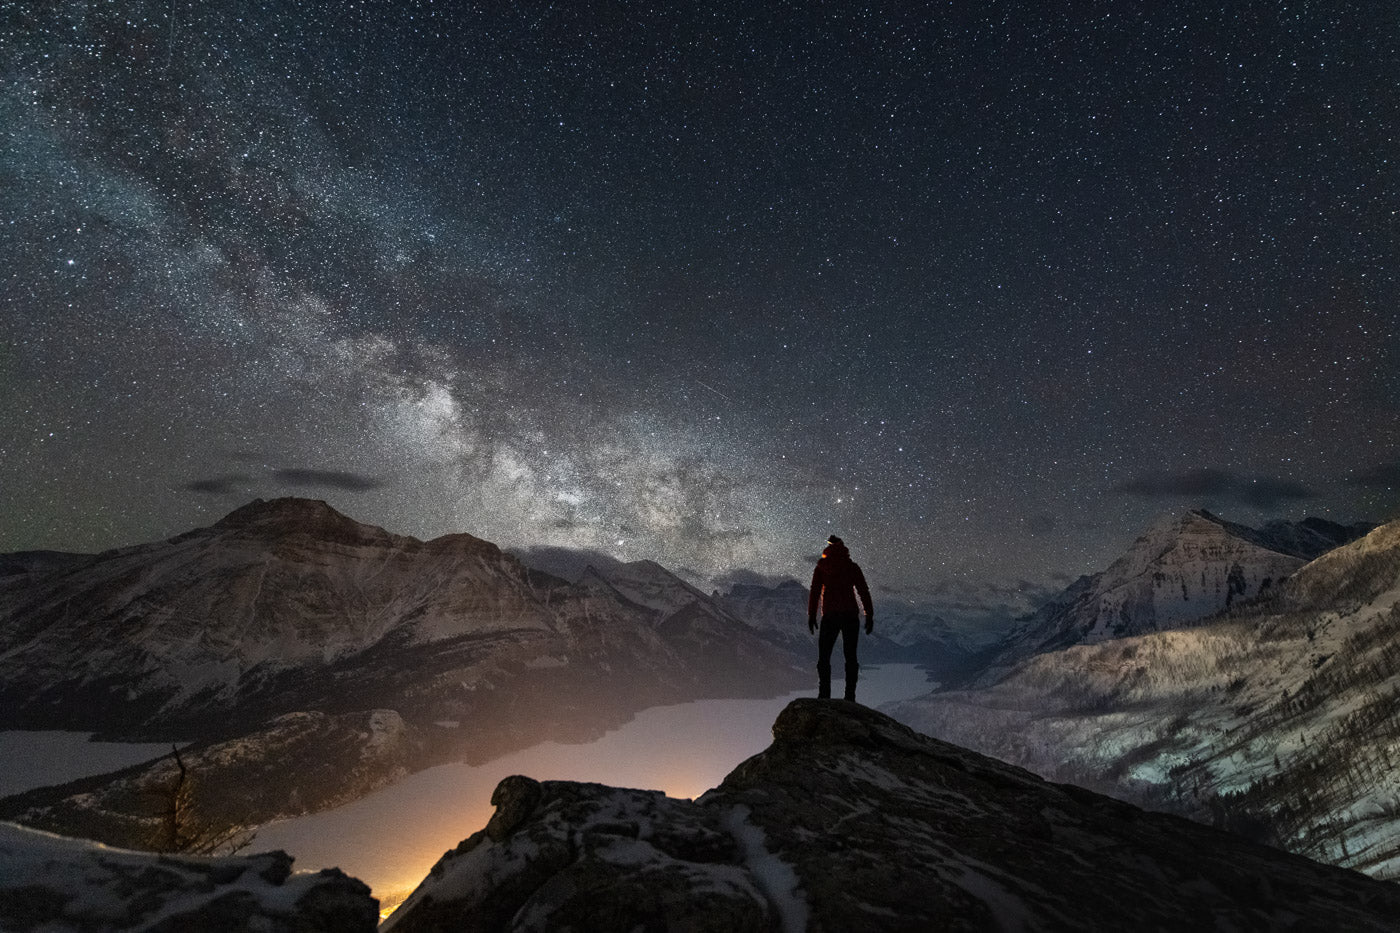 Professional photo taken of a person standing on a mountain peak at night looking at the dark sky, clouds, and stars